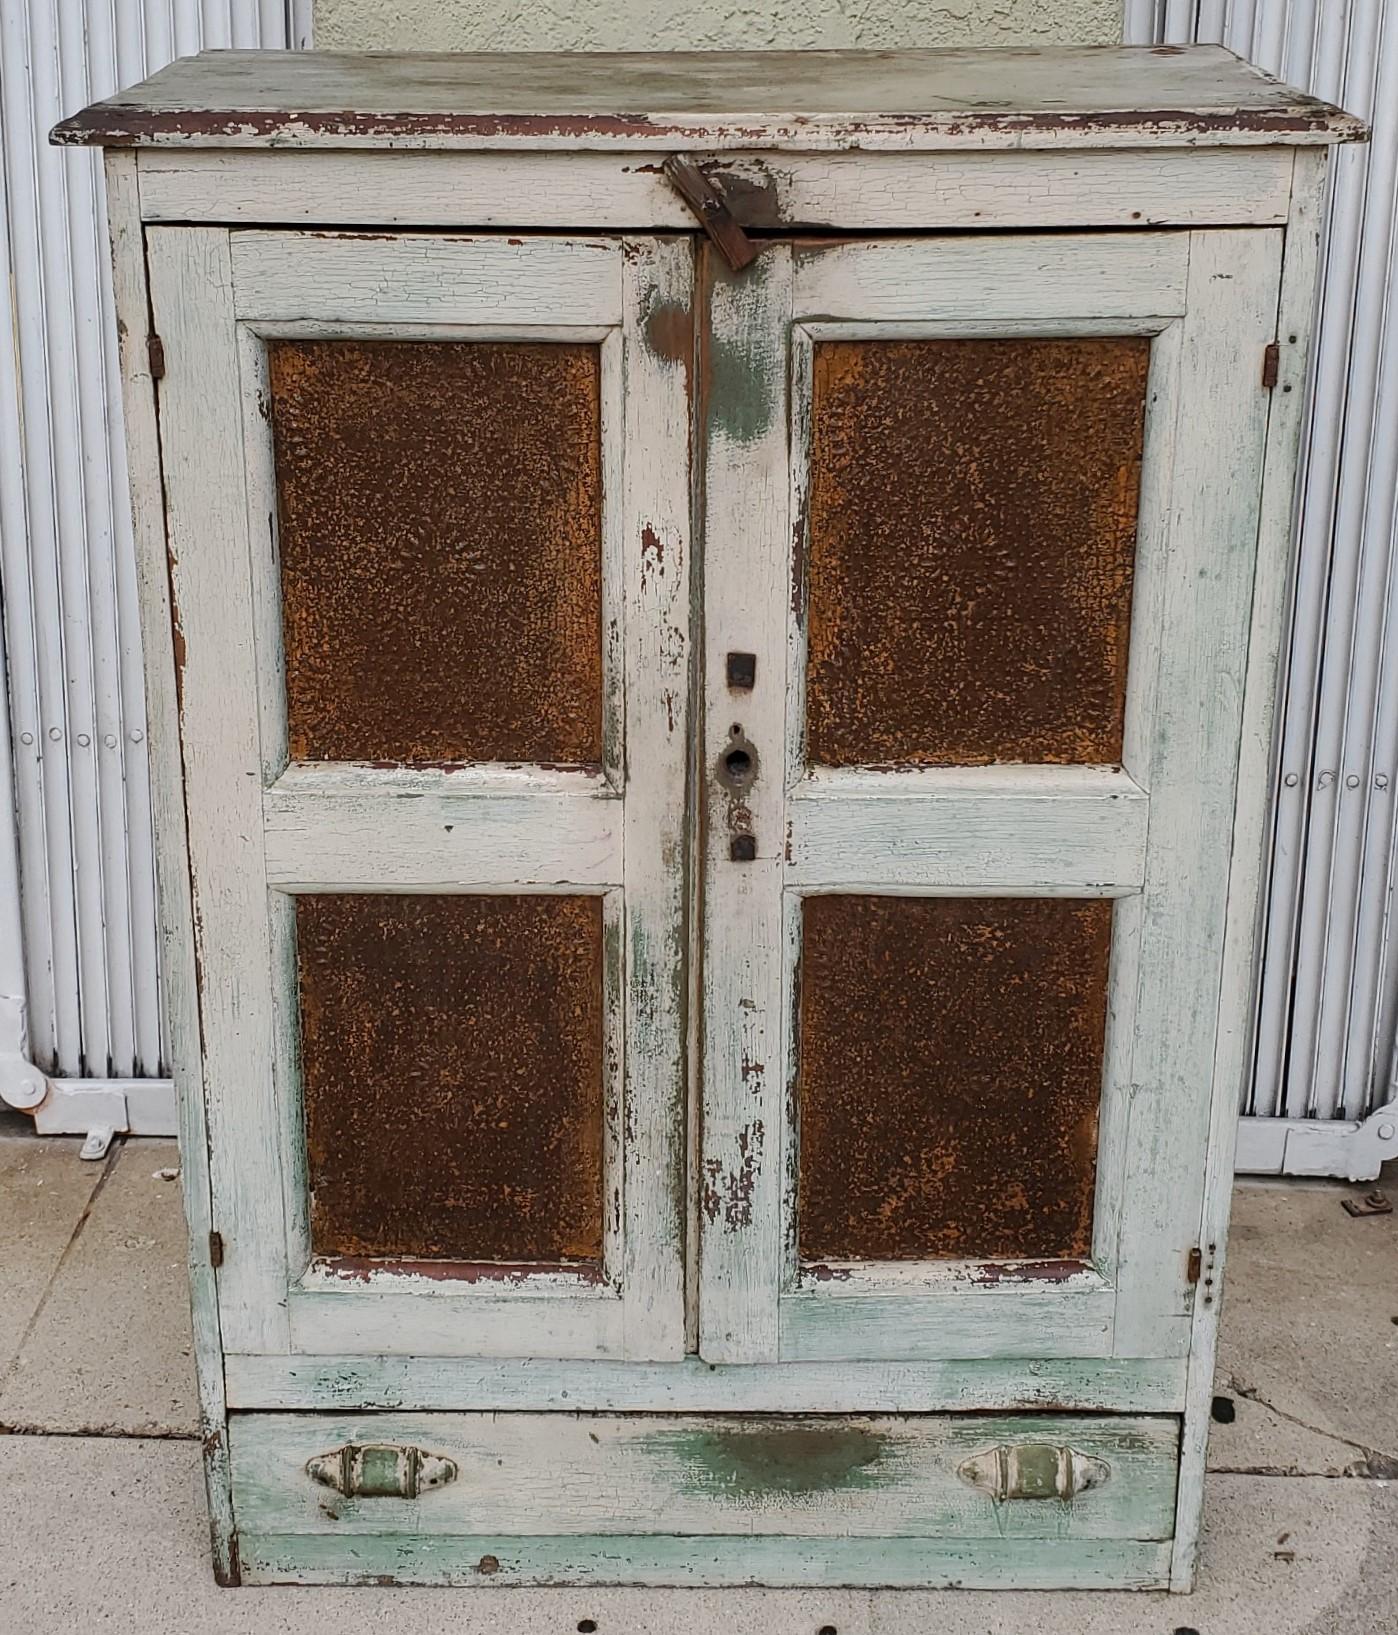 19thc original white over apple green paint and worn & aged punched tin panels. This pie safe is from East Tennessee and is in old original white painted interior as well. This pie safe came right off the farm. The condition is very good with the